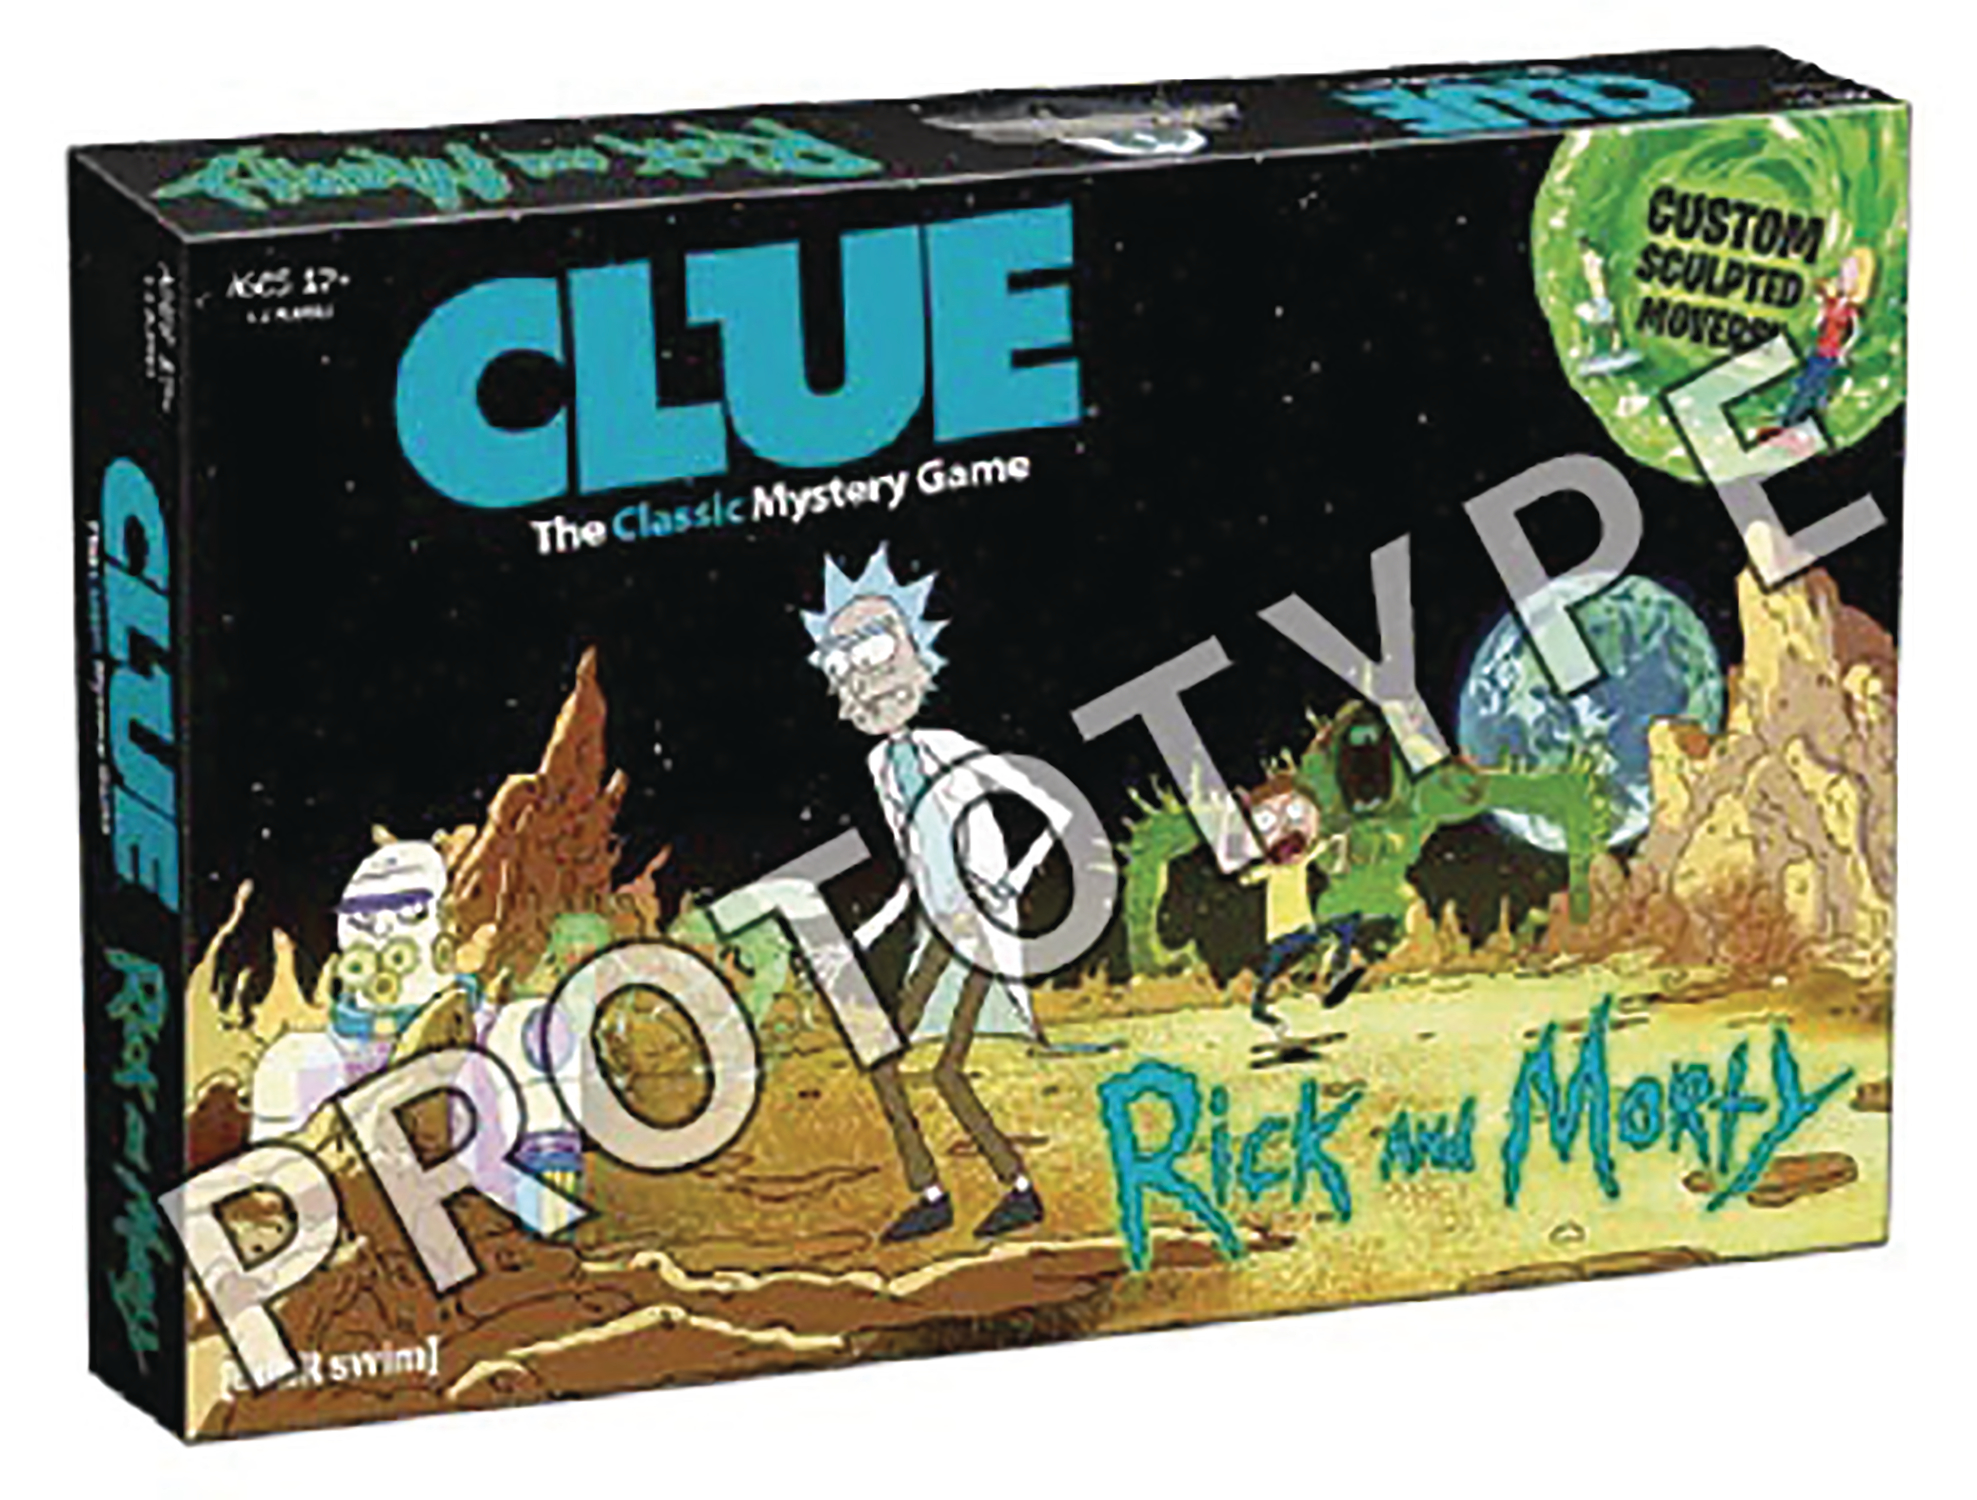 CLUE RICK AND MORTY BACK IN BLACKOUT BOARD GAME